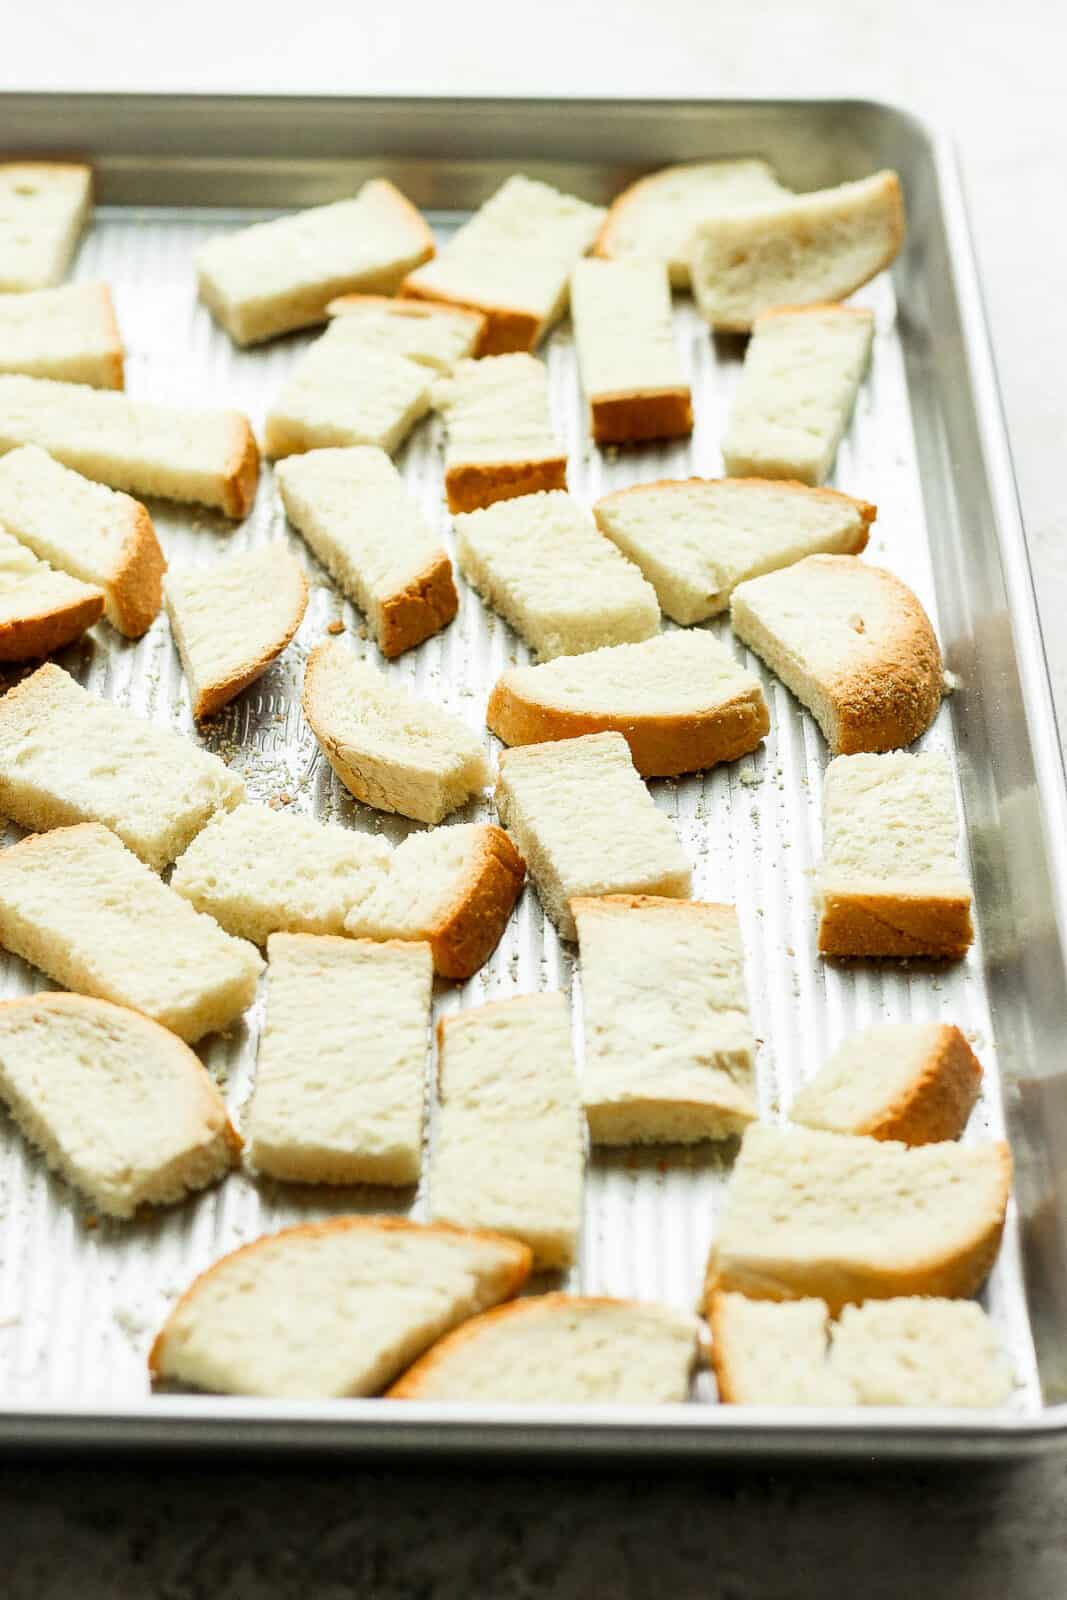 Cubed bread spread out on a baking sheet.